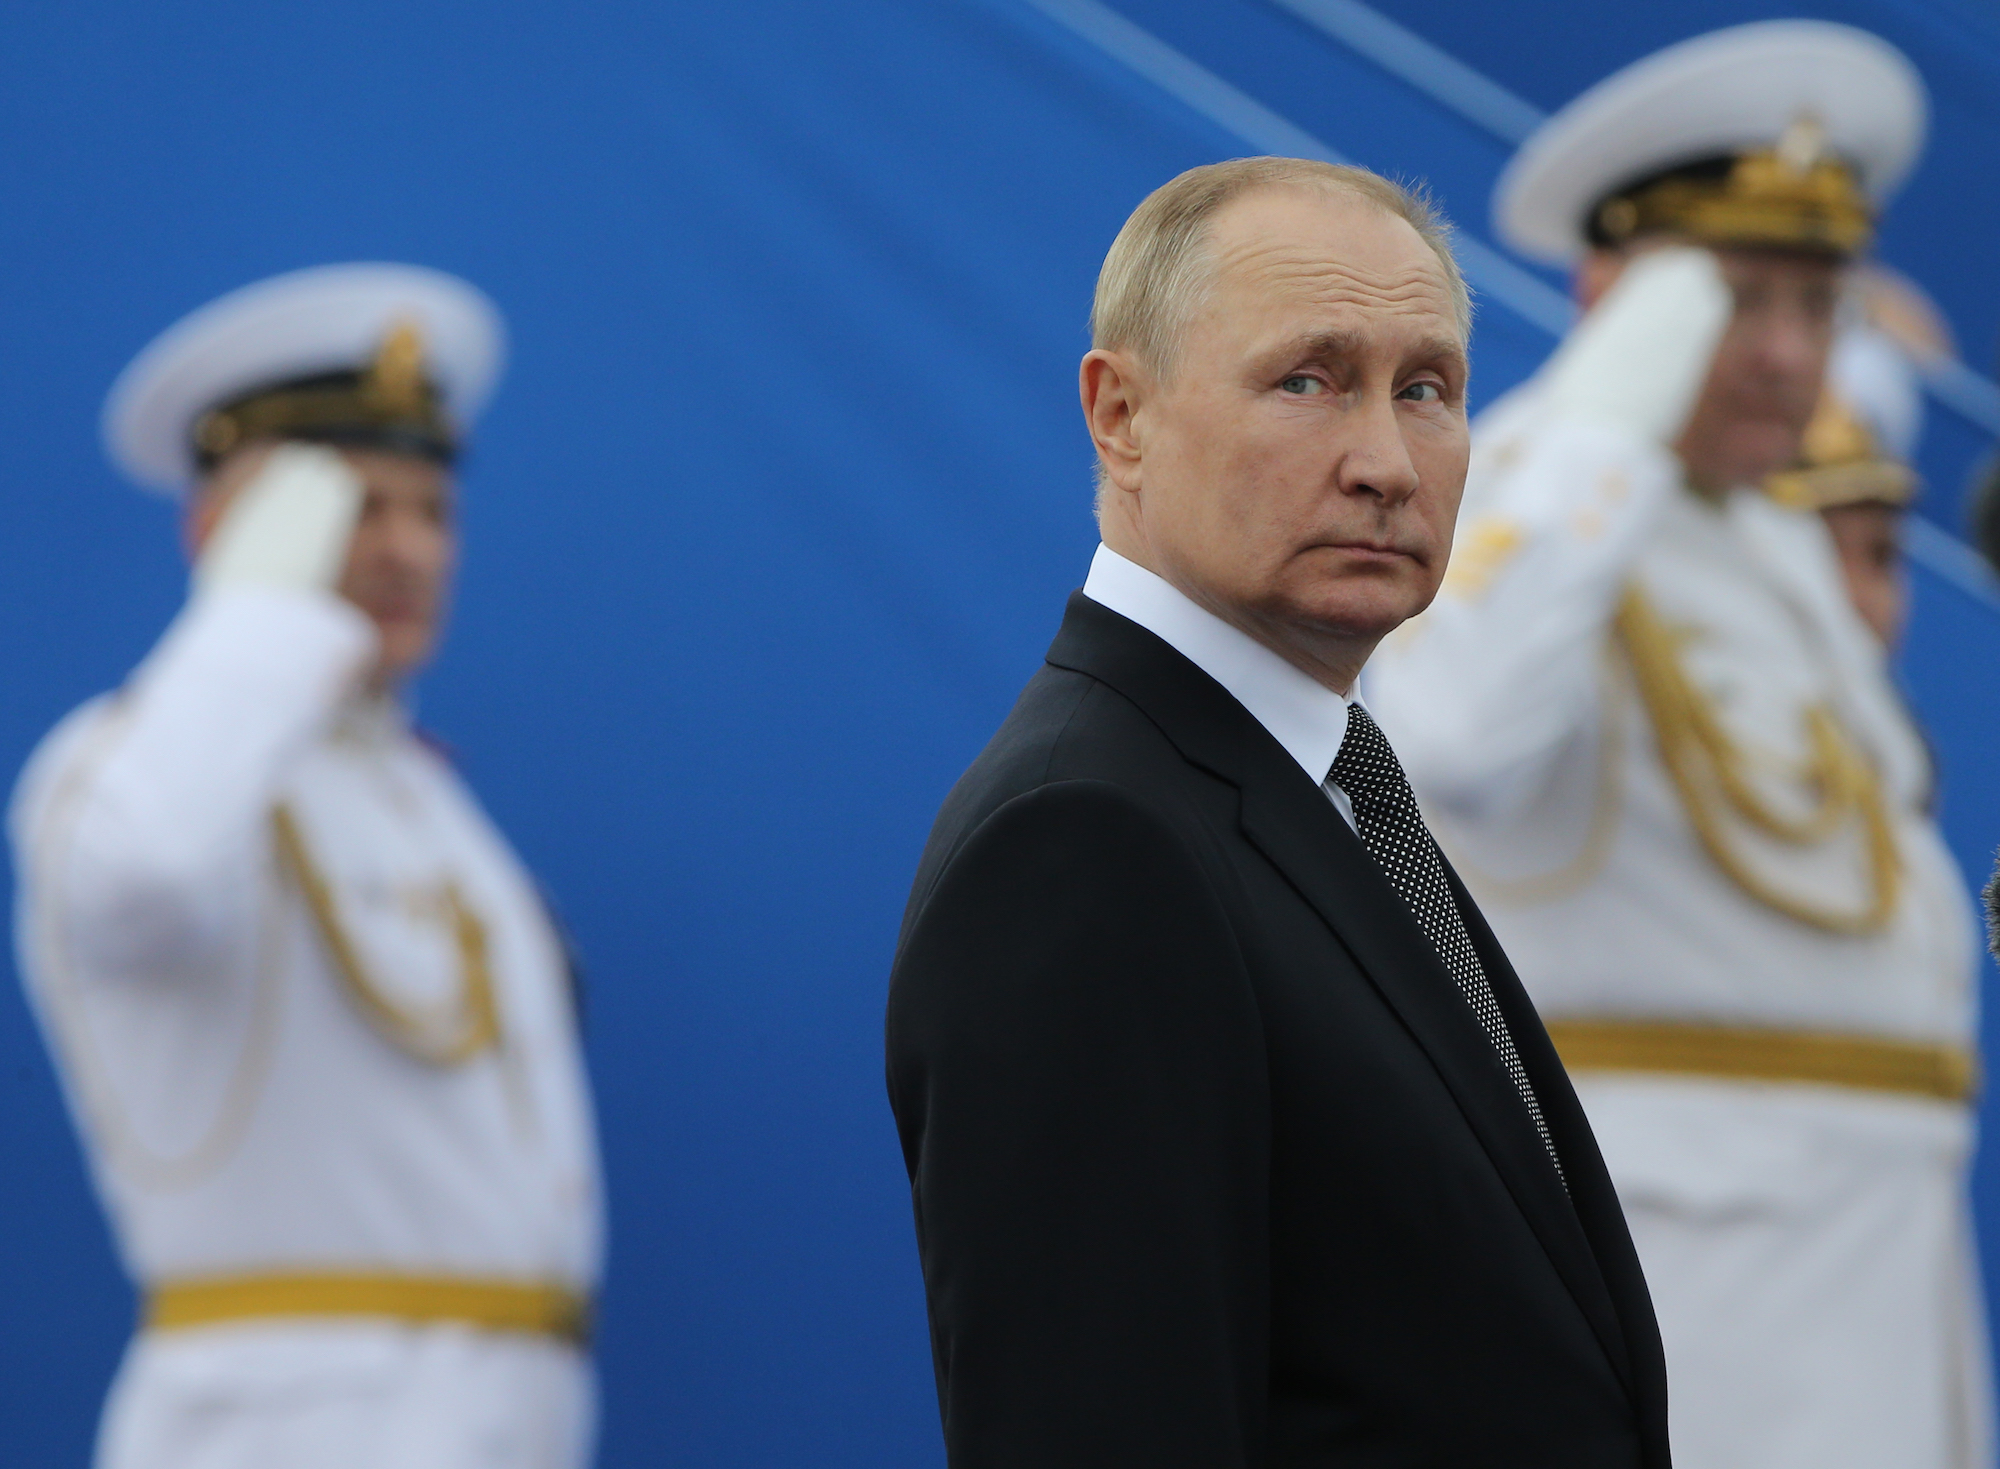 Russian President Vladimir Putin is seen during the Navy Day Parade in St. Petersburg on July 31, 2022.